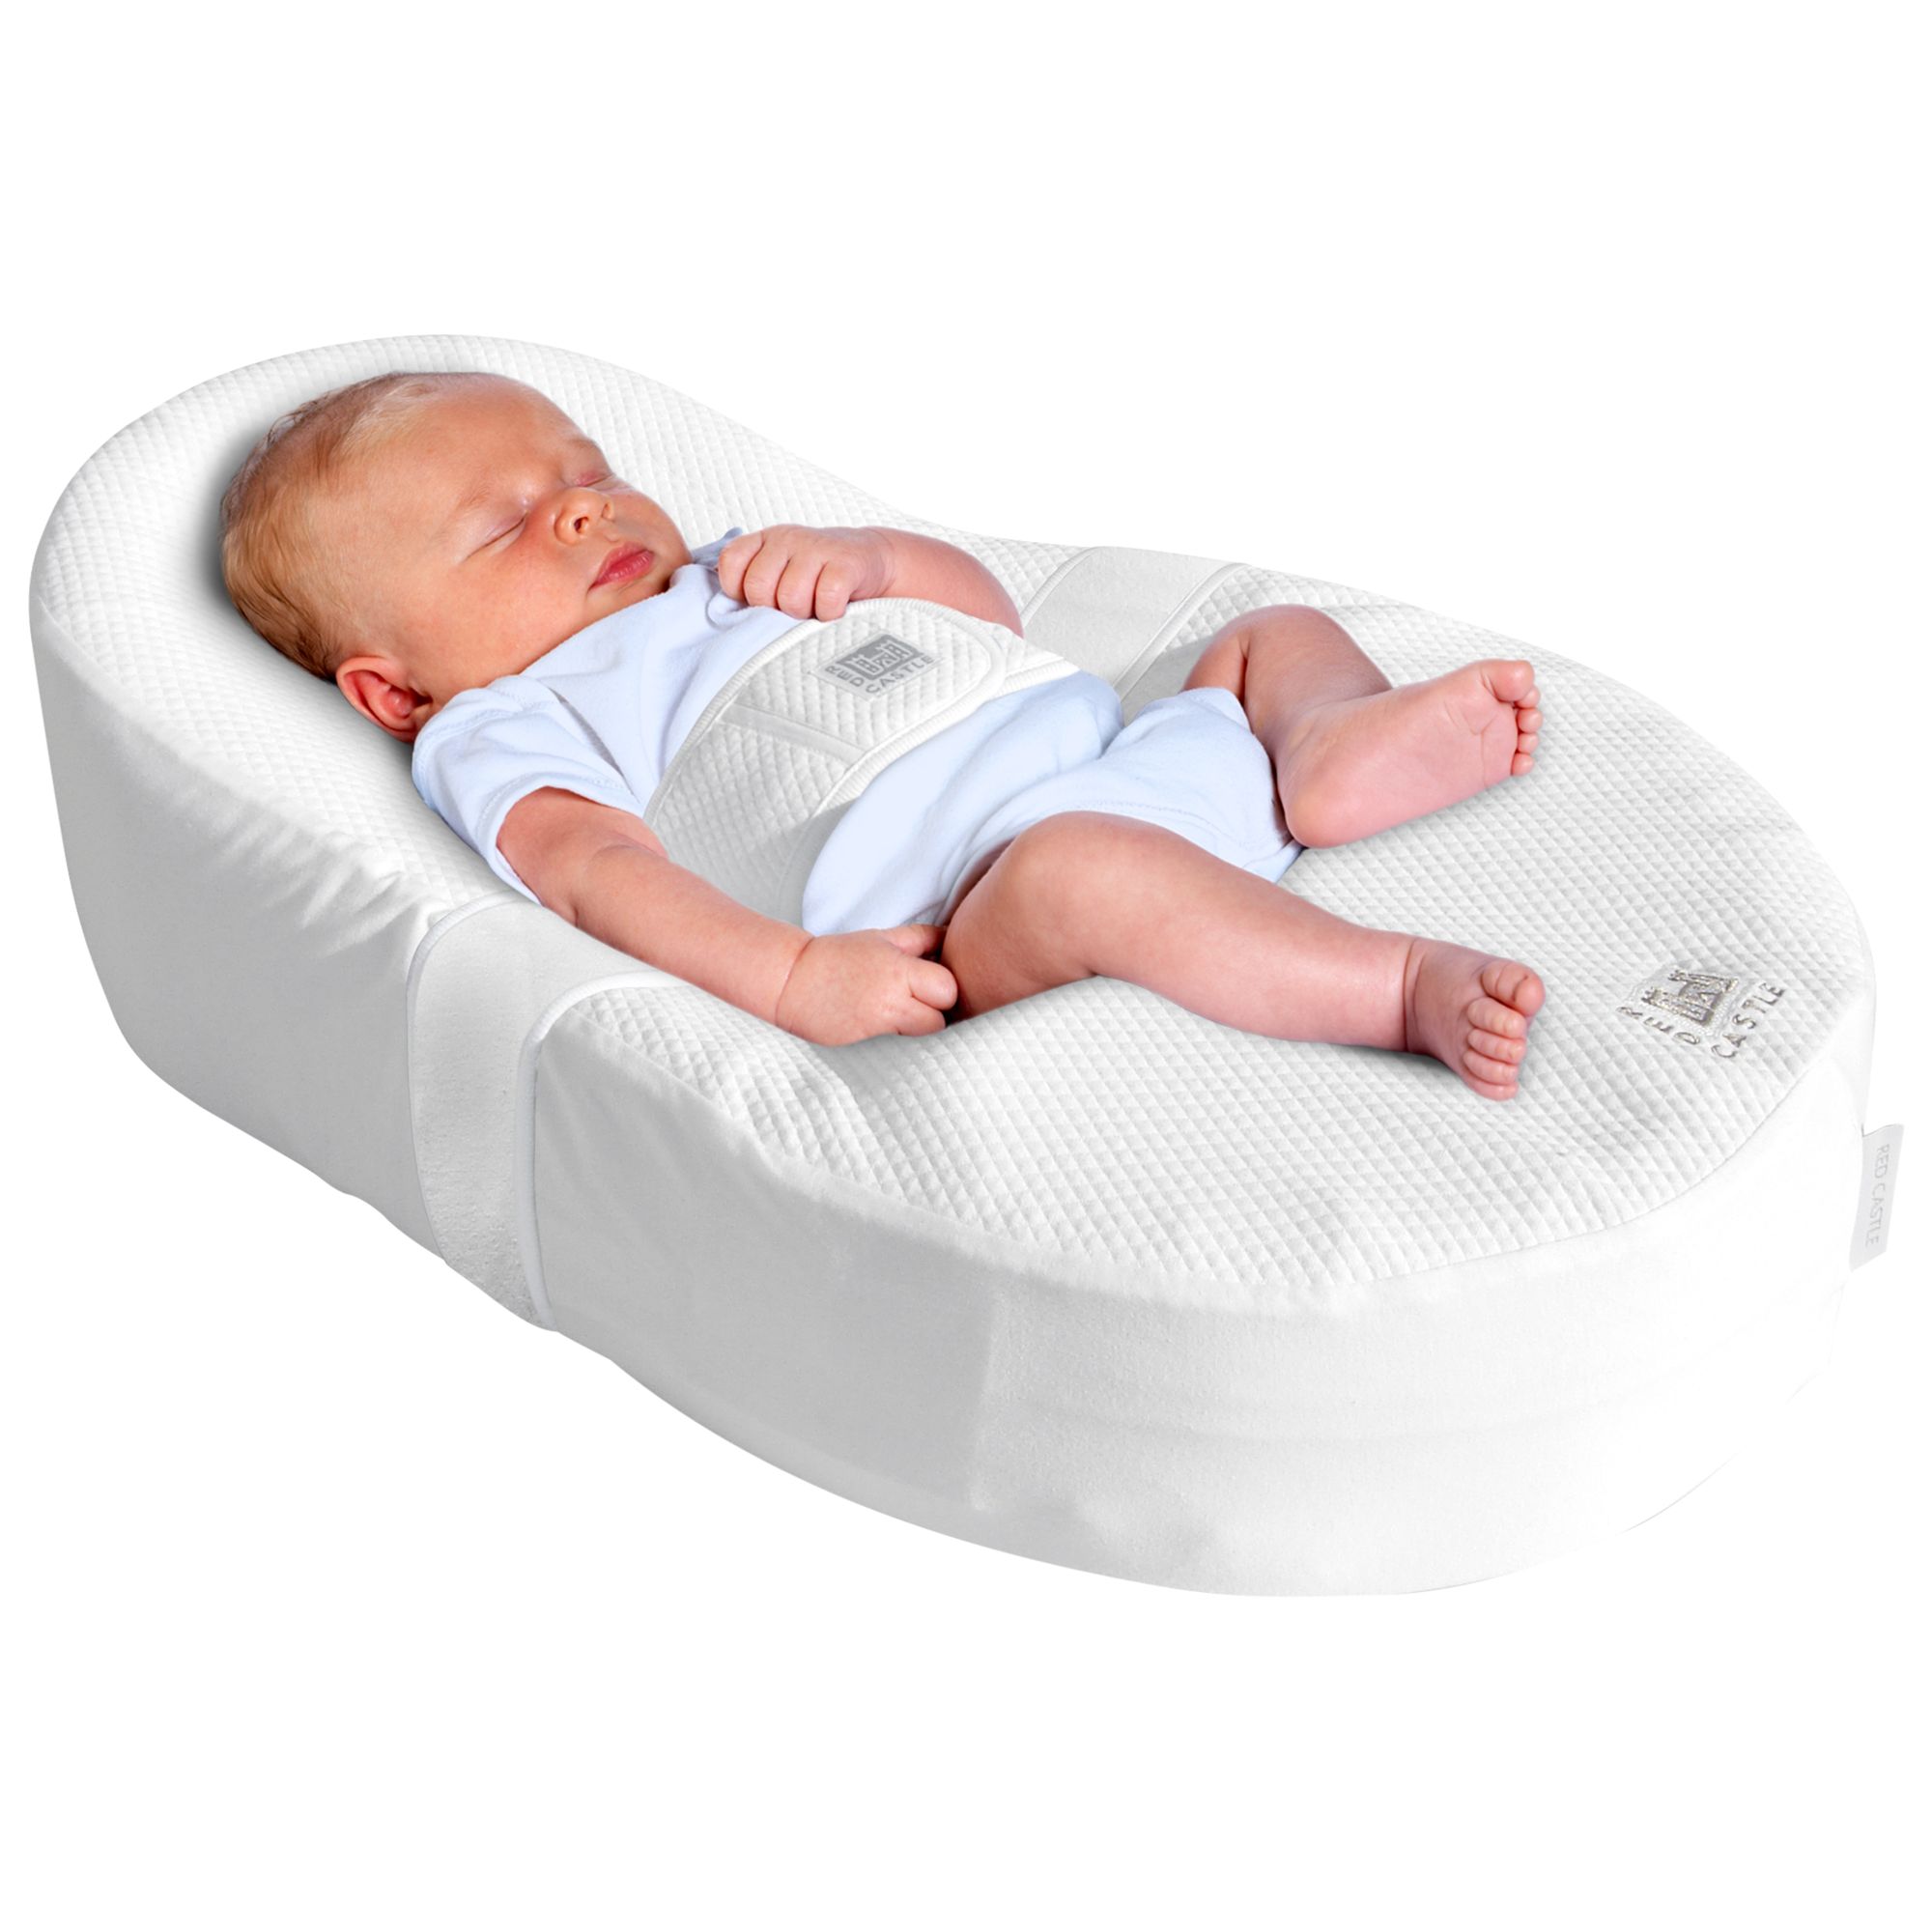 Buy Red Castle Cocoonababy Nest, White Online at johnlewis.com